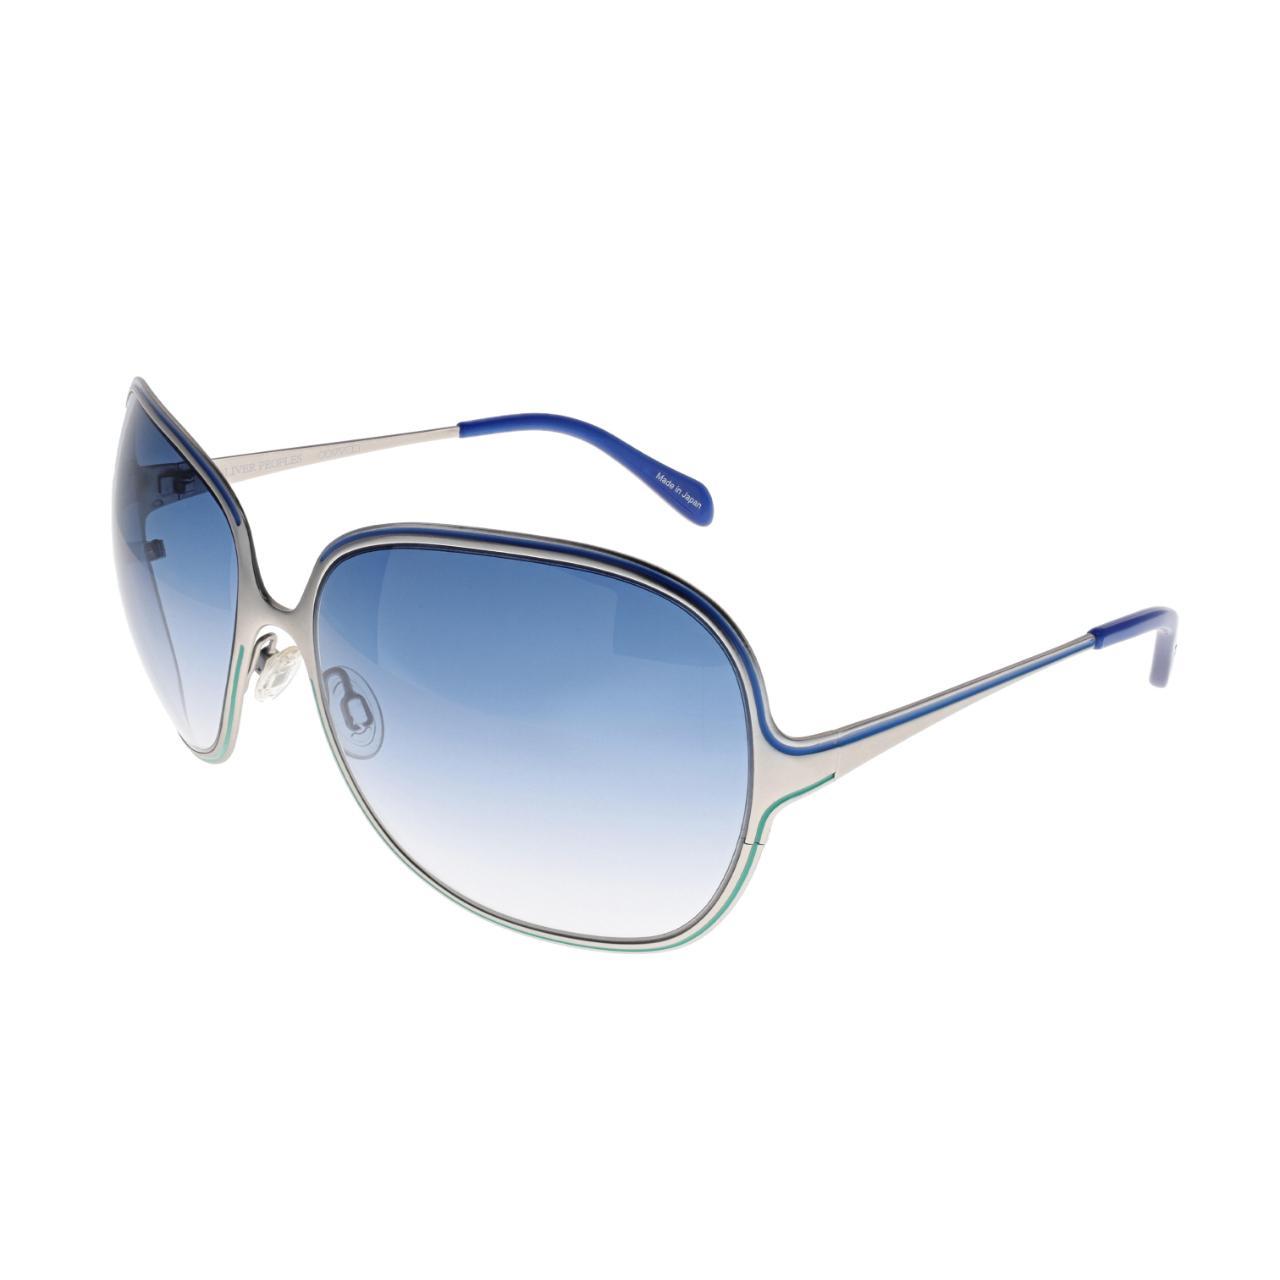 Oliver Peoples Women's Silver and Blue Sunglasses